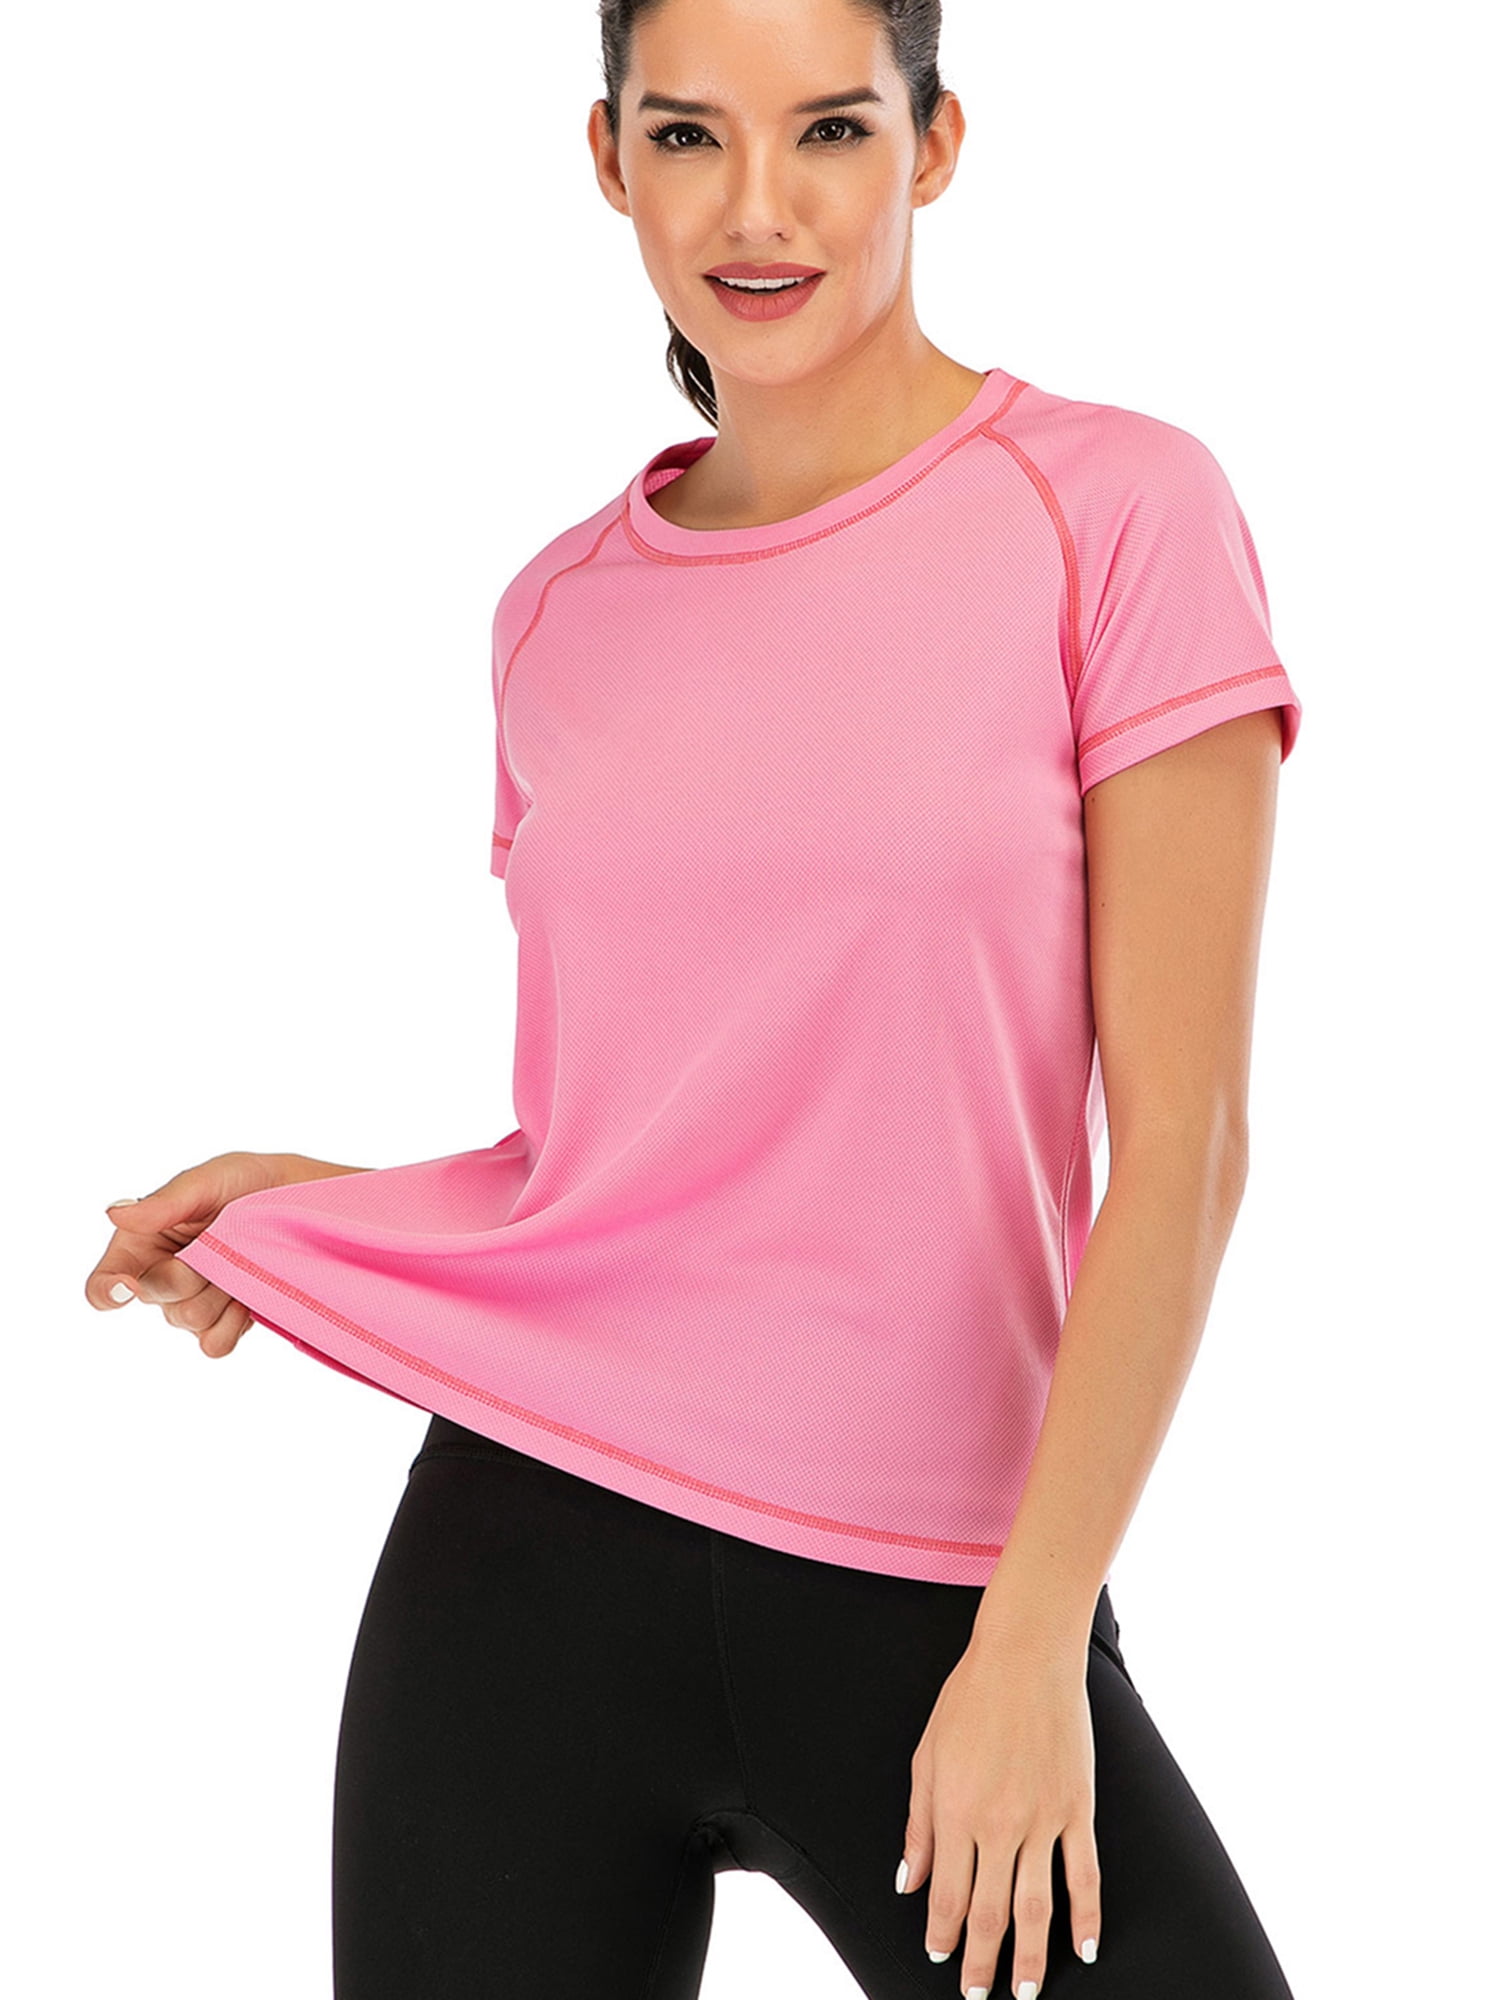 MISS FORTUNE Women Plus Size Tops Short Sleeve Active Wear Workout Shirts  Women Outdoor Gym Hiking Yoga Tops Quick Dry